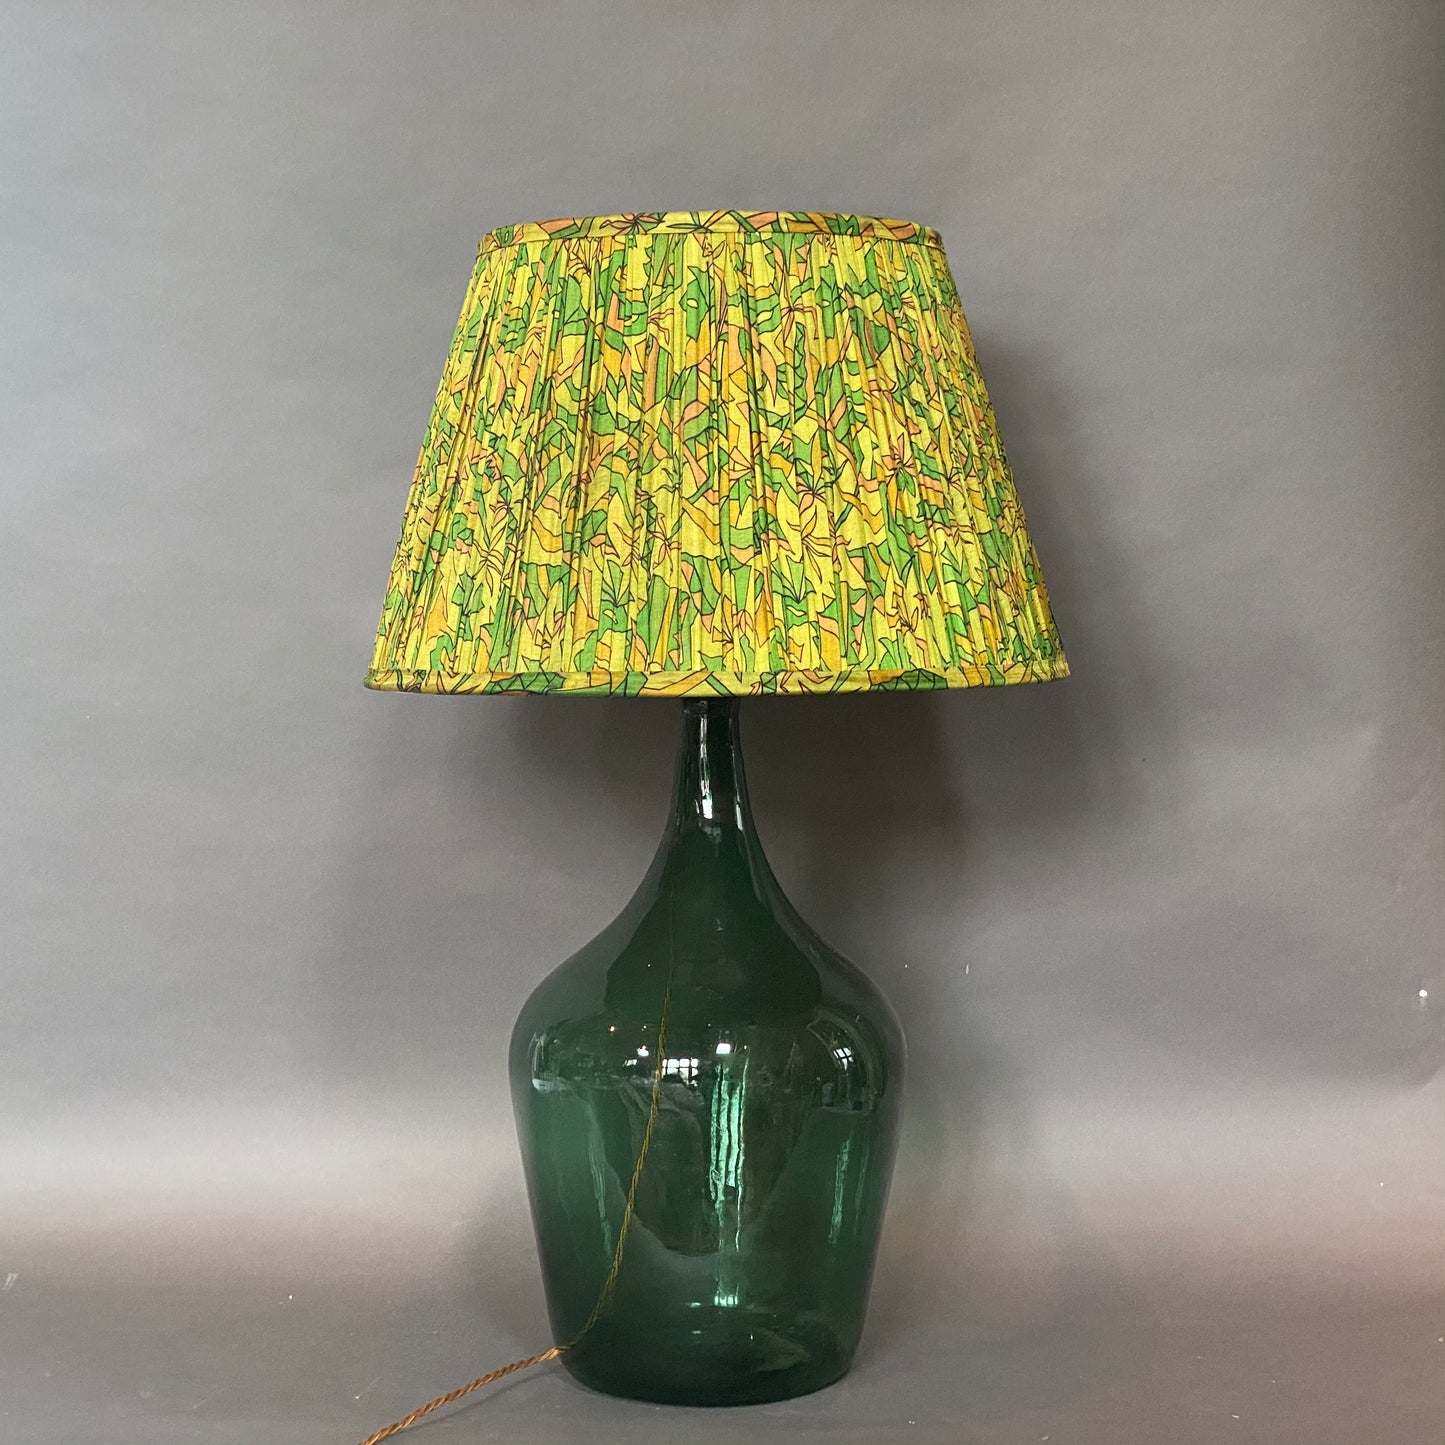 Green & citrine silk lampshade sown on a bottle green glass lamp base on a grey background